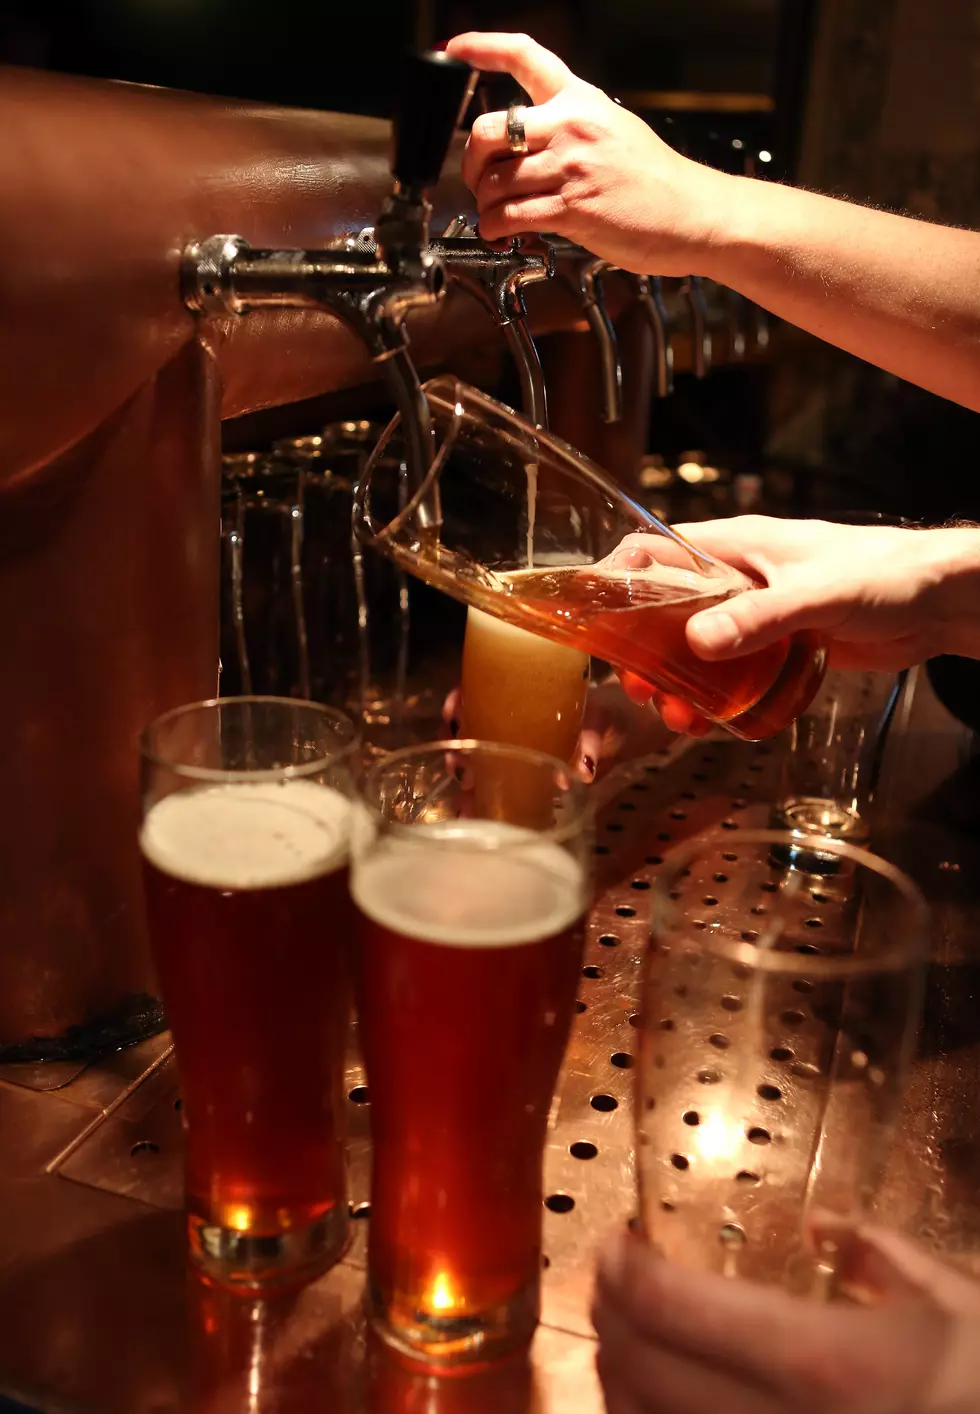 MN Bars, Restaurants Issue Urgent Plea to Follow COVID-19 Rules, ‘Our Survival Depends On It’